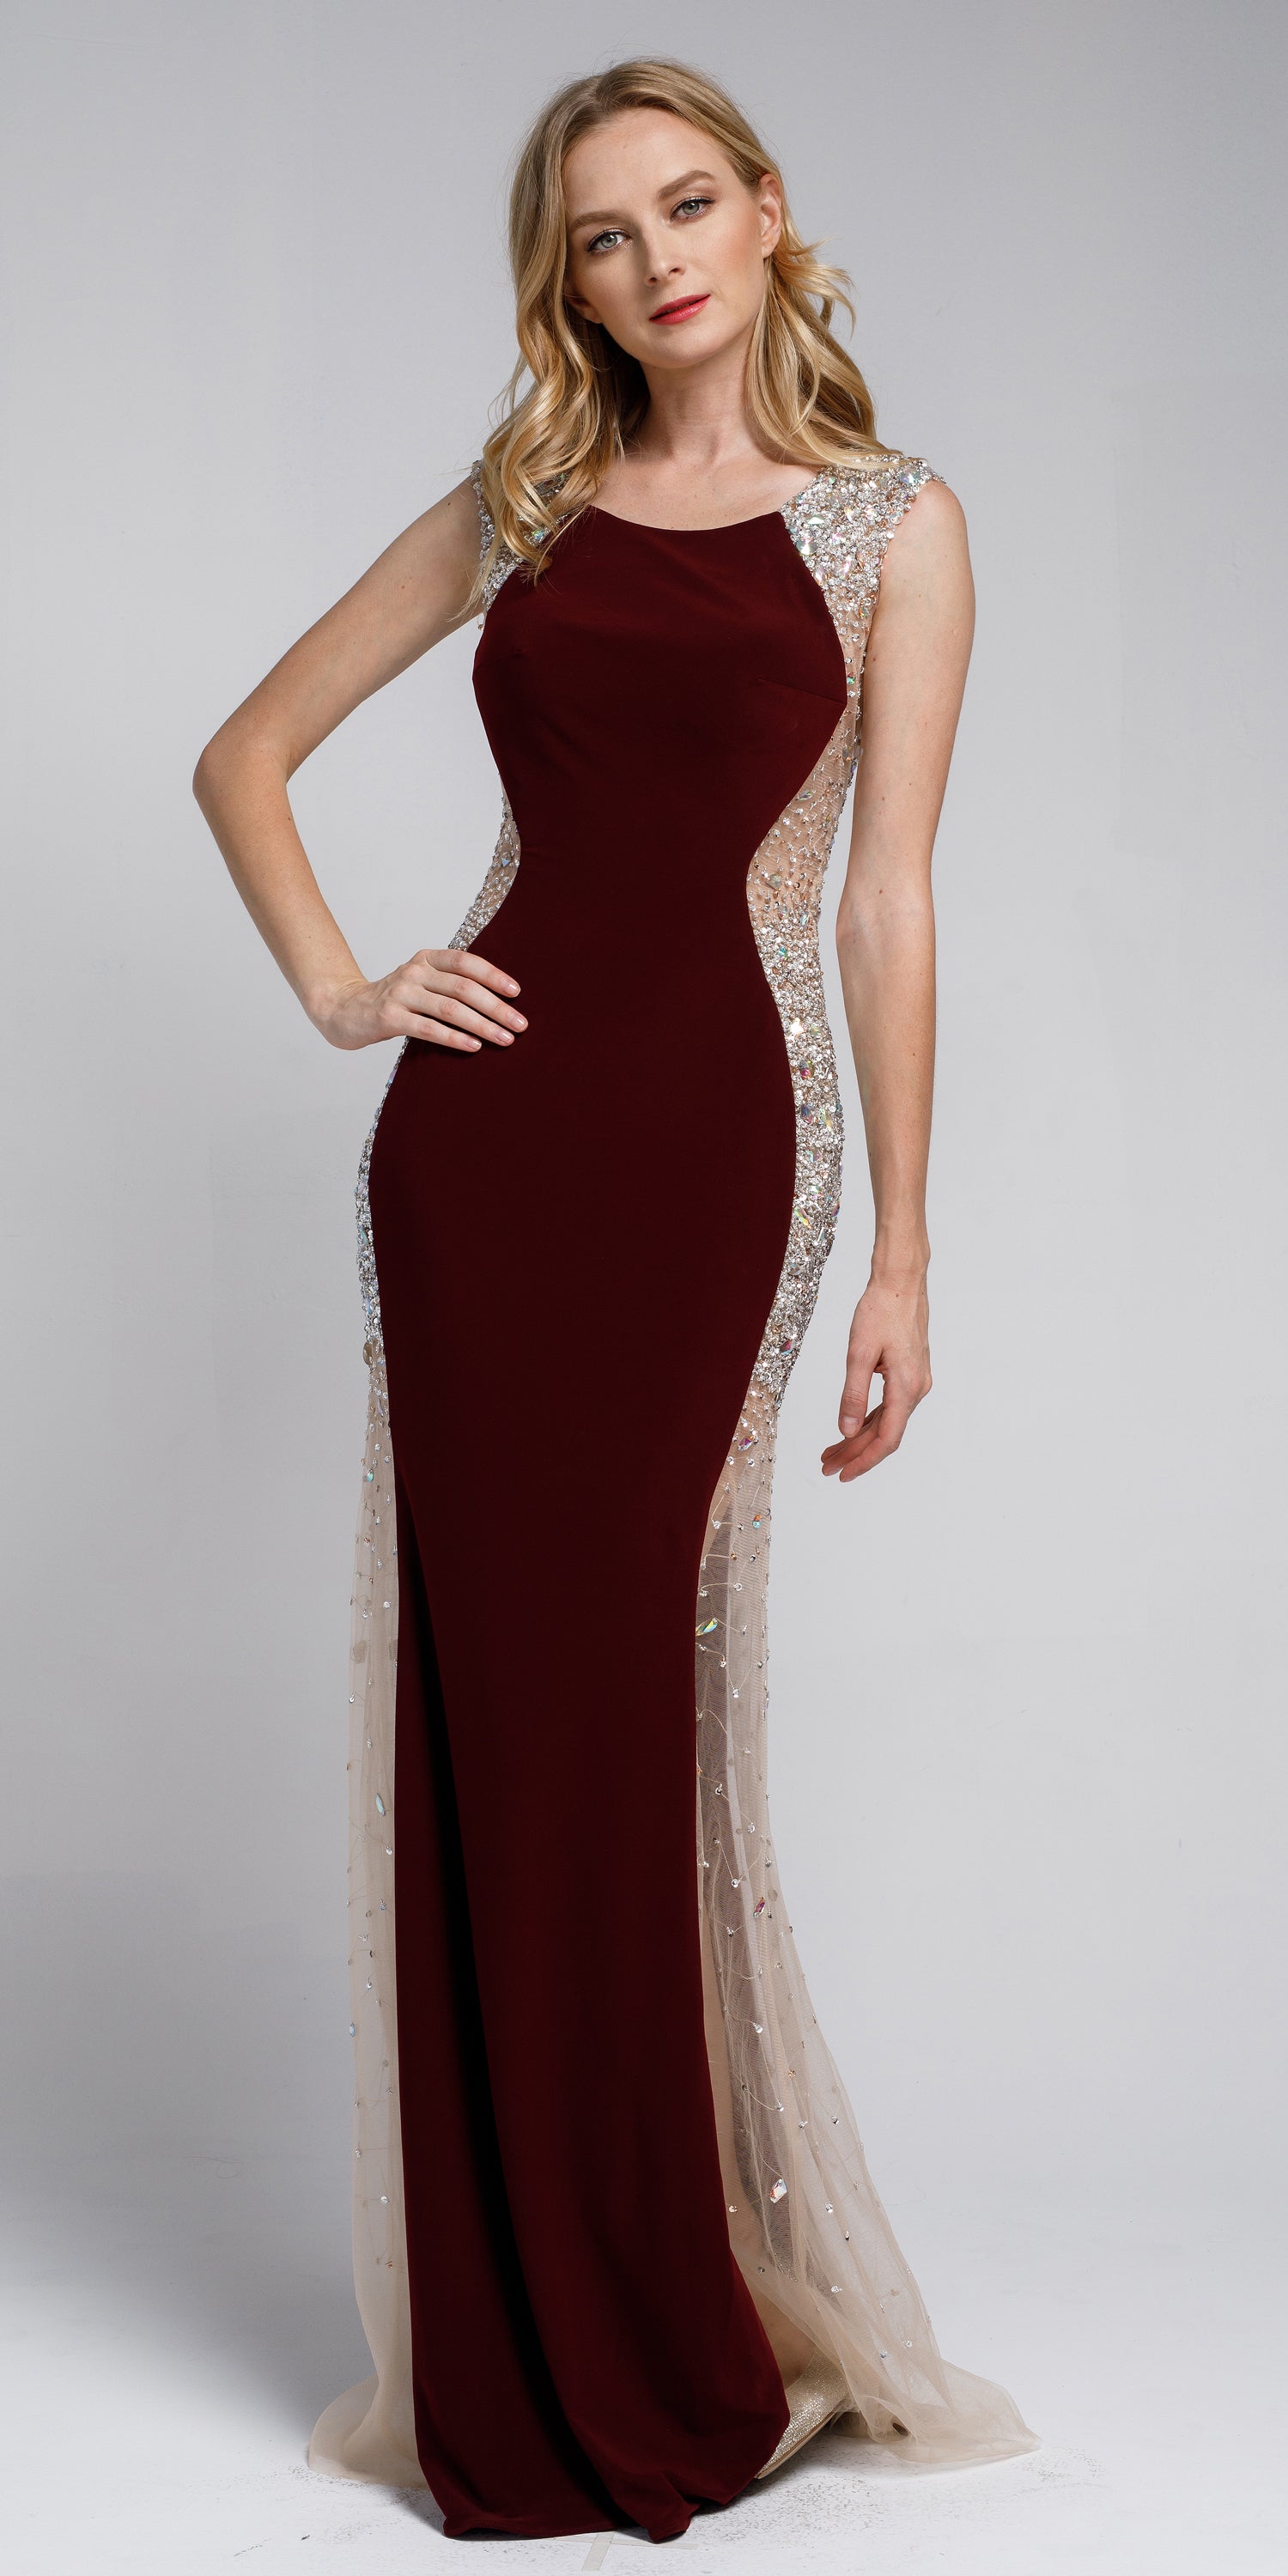 Image of Silhouette Styles Prom Gown With Rhinestone Accents in Burgundy